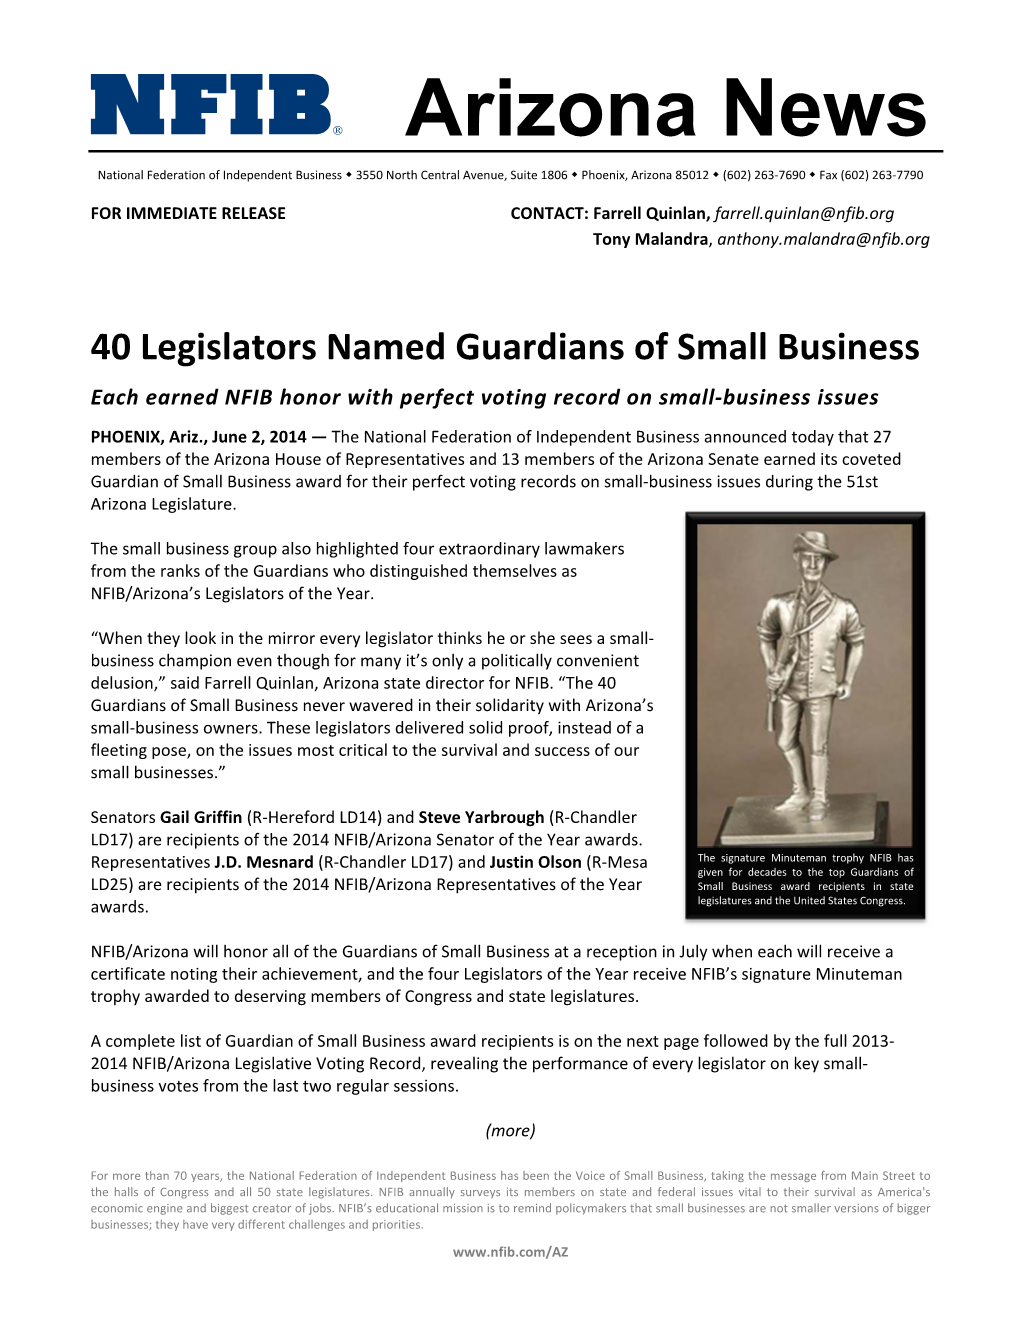 40 Legislators Named Guardians of Small Business Each Earned NFIB Honor with Perfect Voting Record on Small‐Business Issues